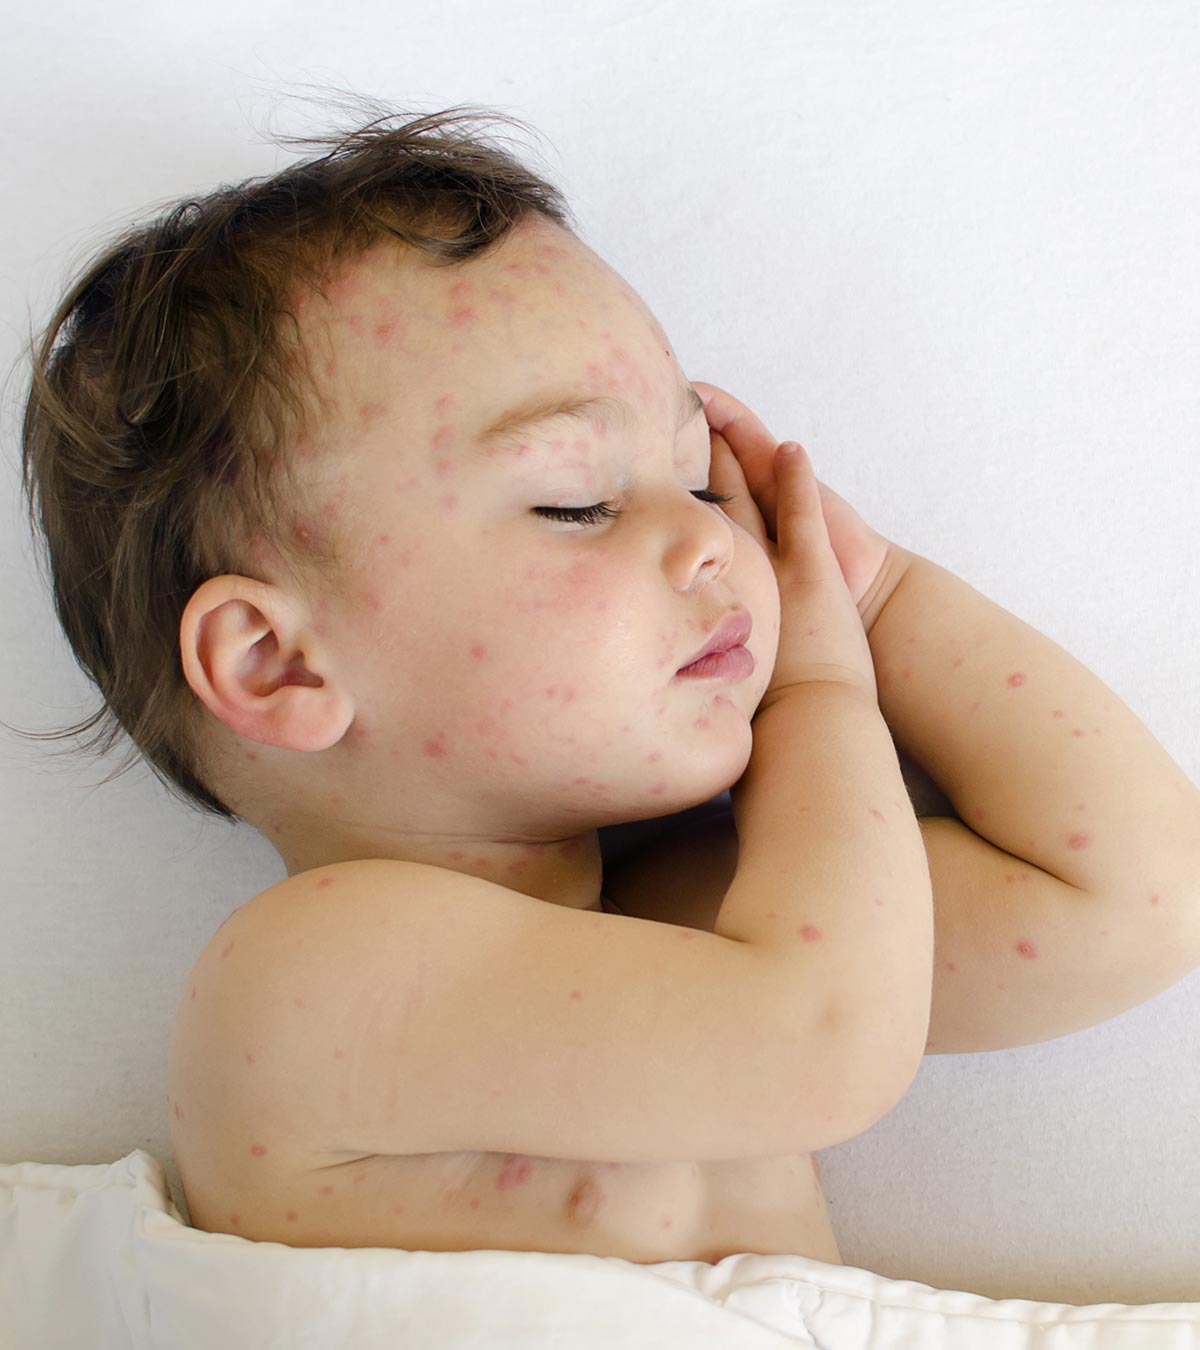 5 Safe And Effective Treatments For Bug Bites in Babies